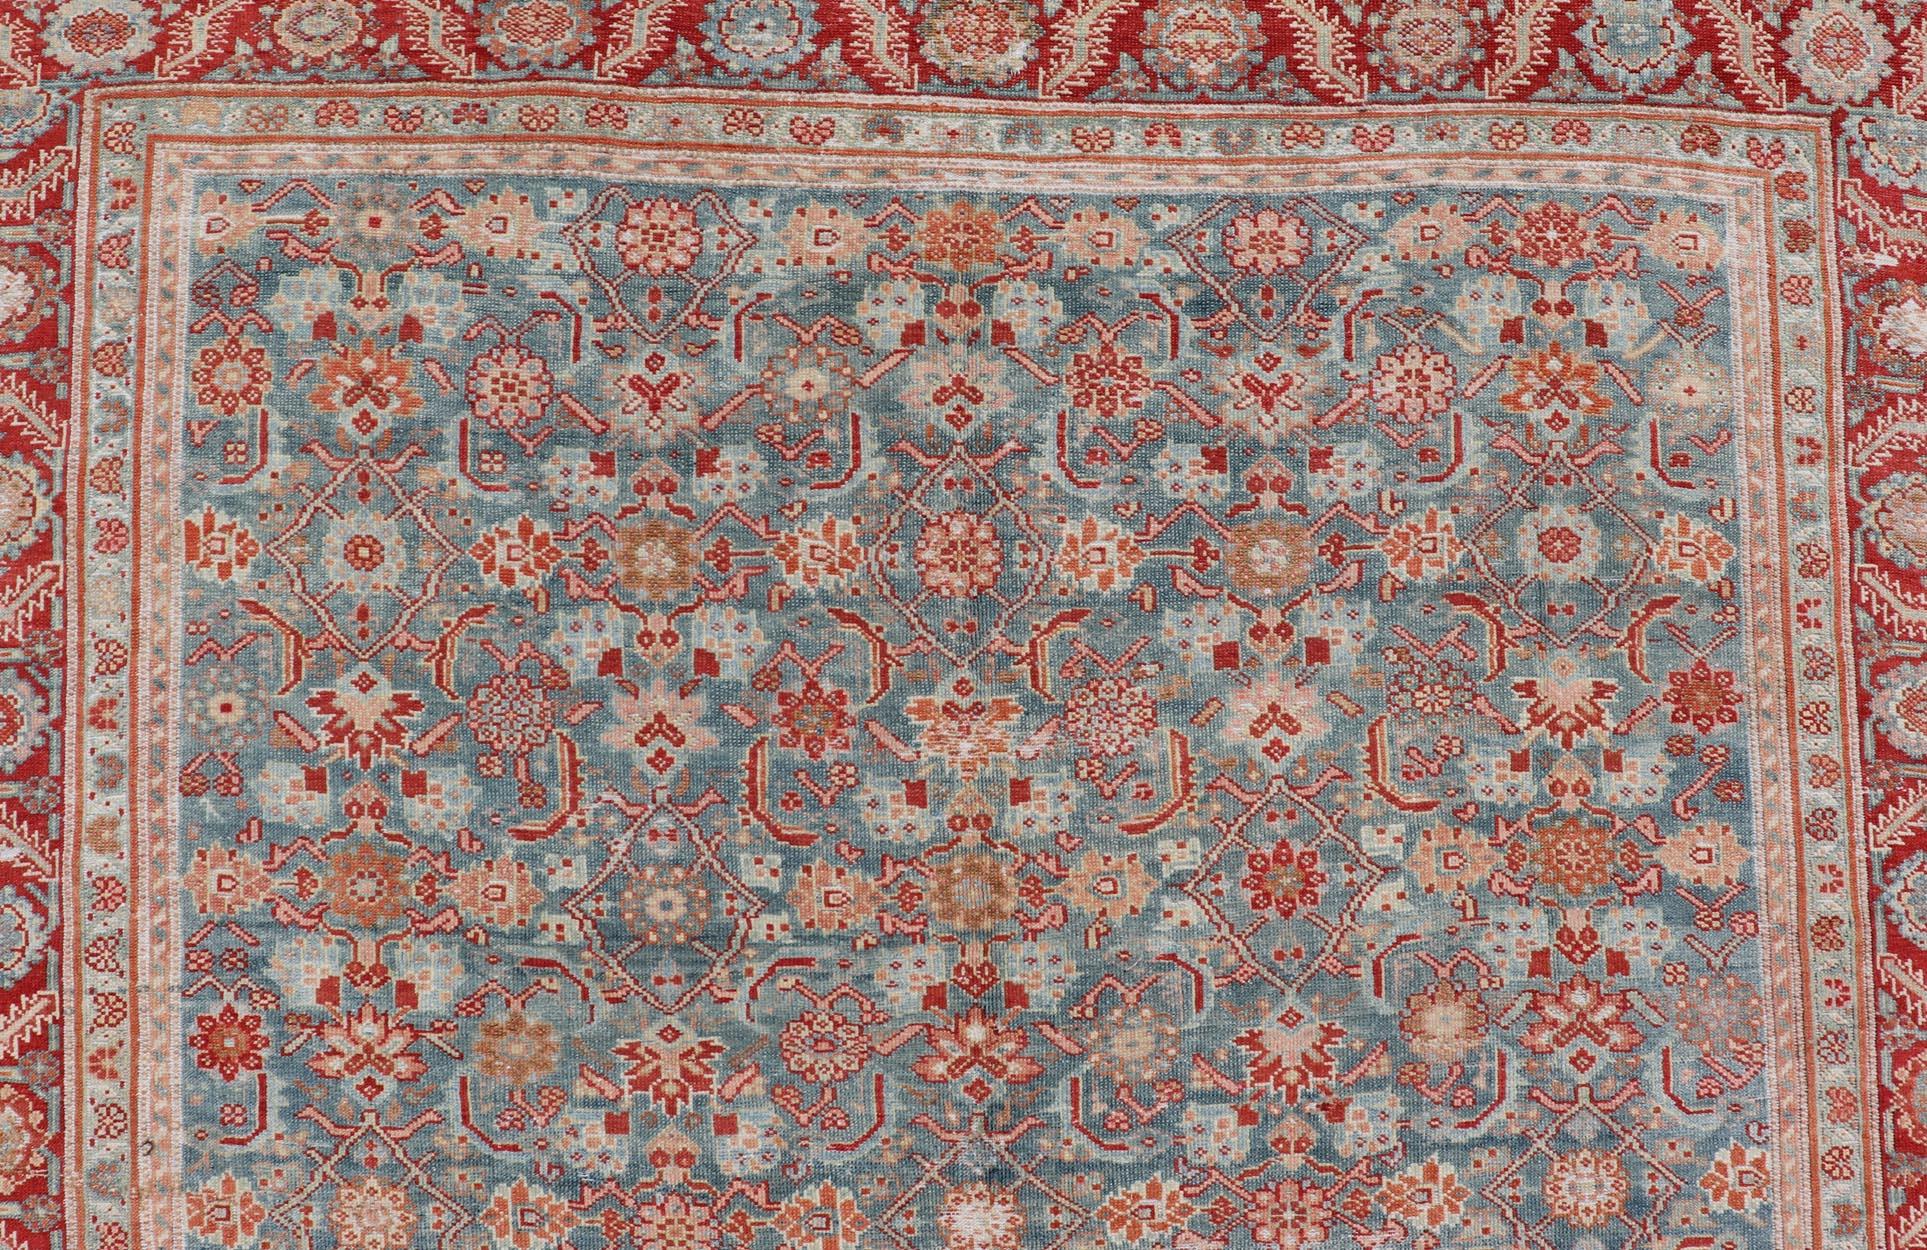 Antique Persian Malayer Gallery rug with All Over Design in Blue's and Red. Keivan Woven Arts; rug # ZIR-2 / Country of origin: Iran Type/ Malayer Circa 1900's
Measures: 6'2 x 18'2
This antique Malayer gallery carpet from 1900's Persia features